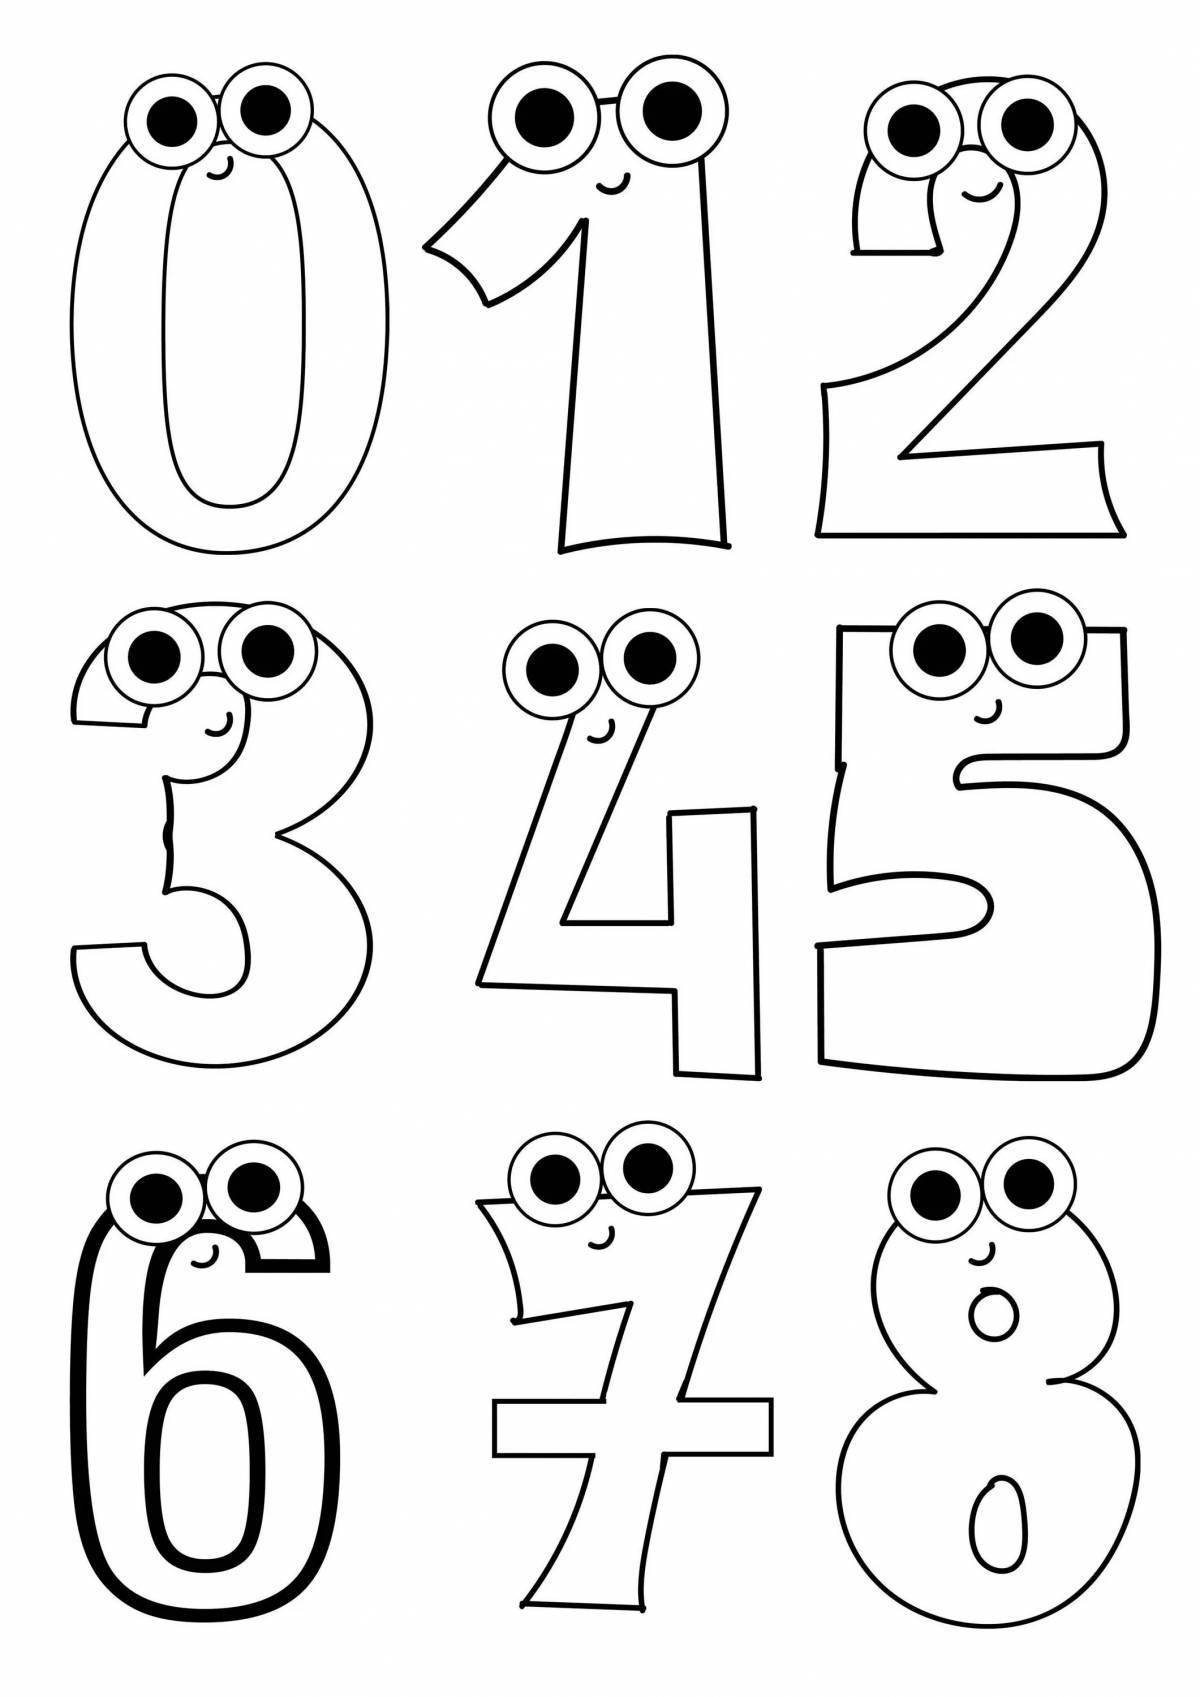 Funny coloring page numbers with eyes